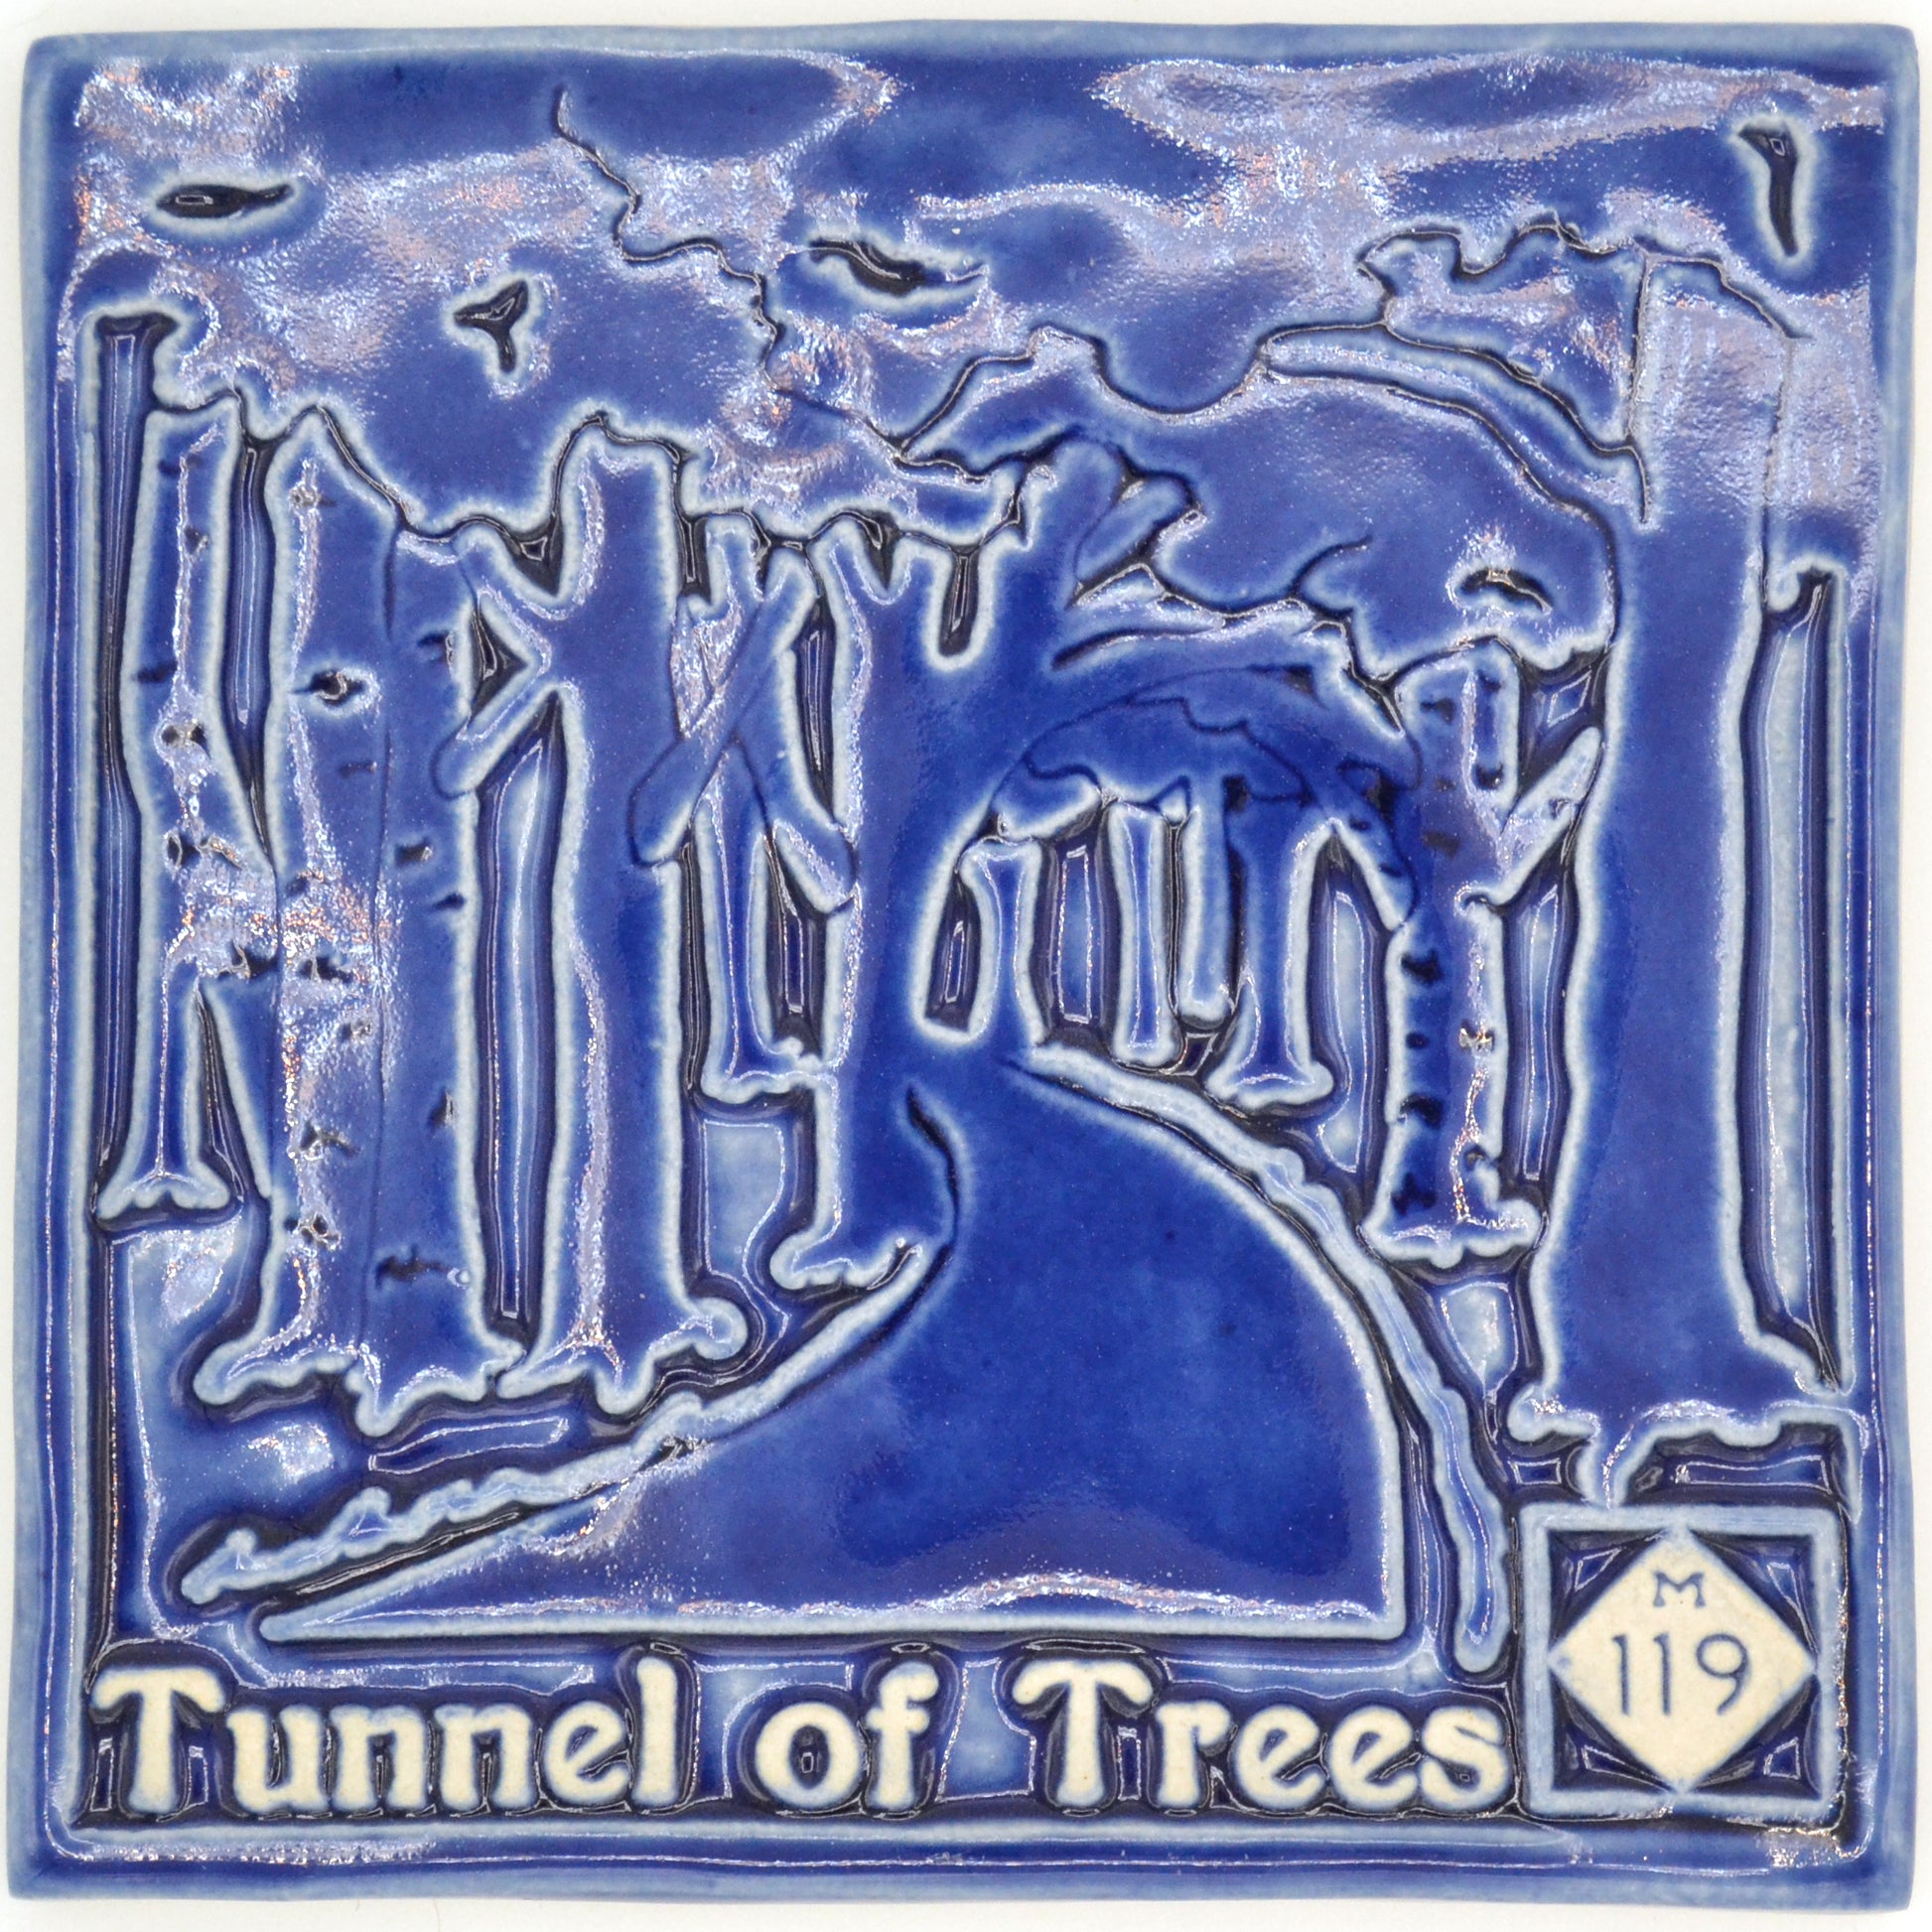 6x6 tunnel of trees tile blue